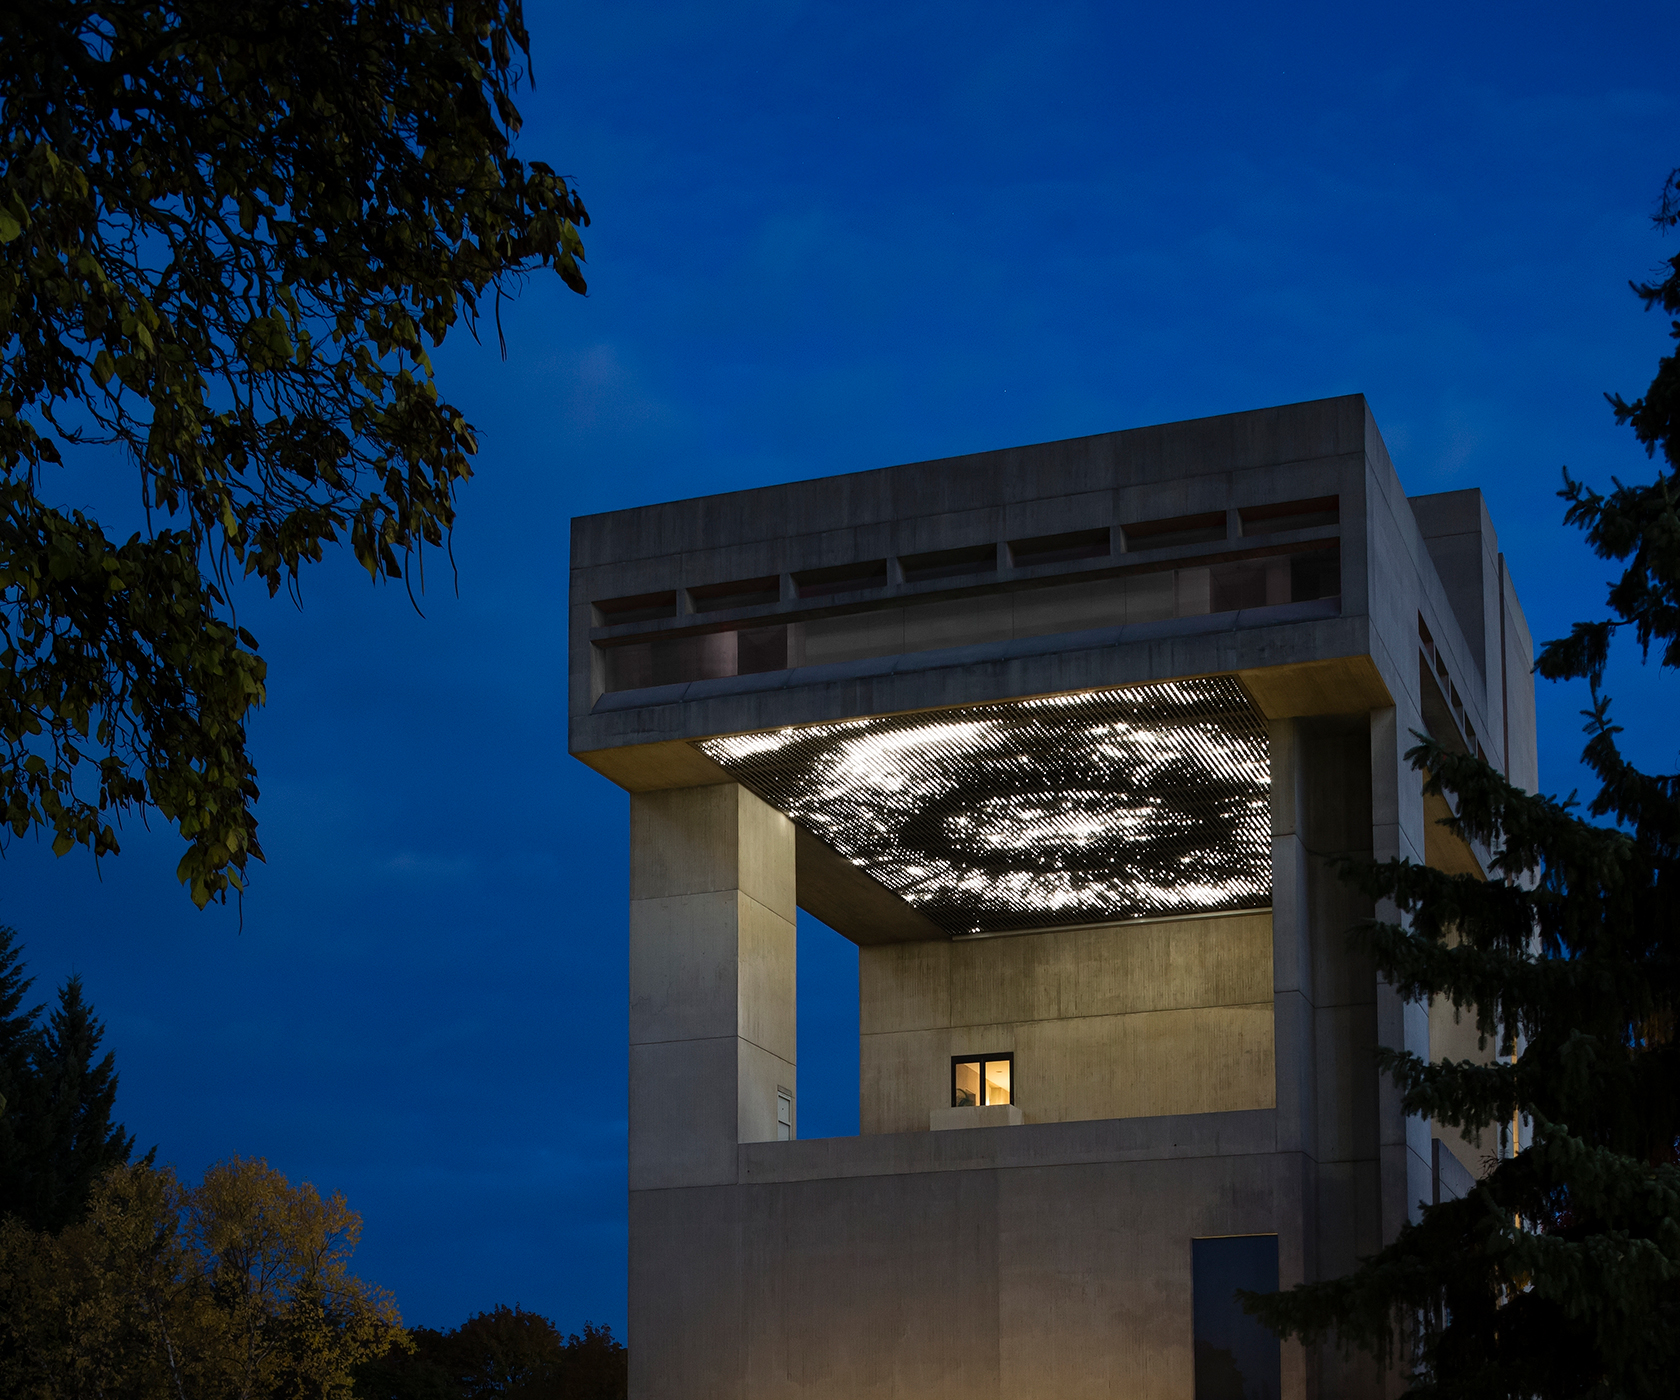 A pattern of lights appears beneath the cantilevered roof of a concrete building at night with tall trees on either side